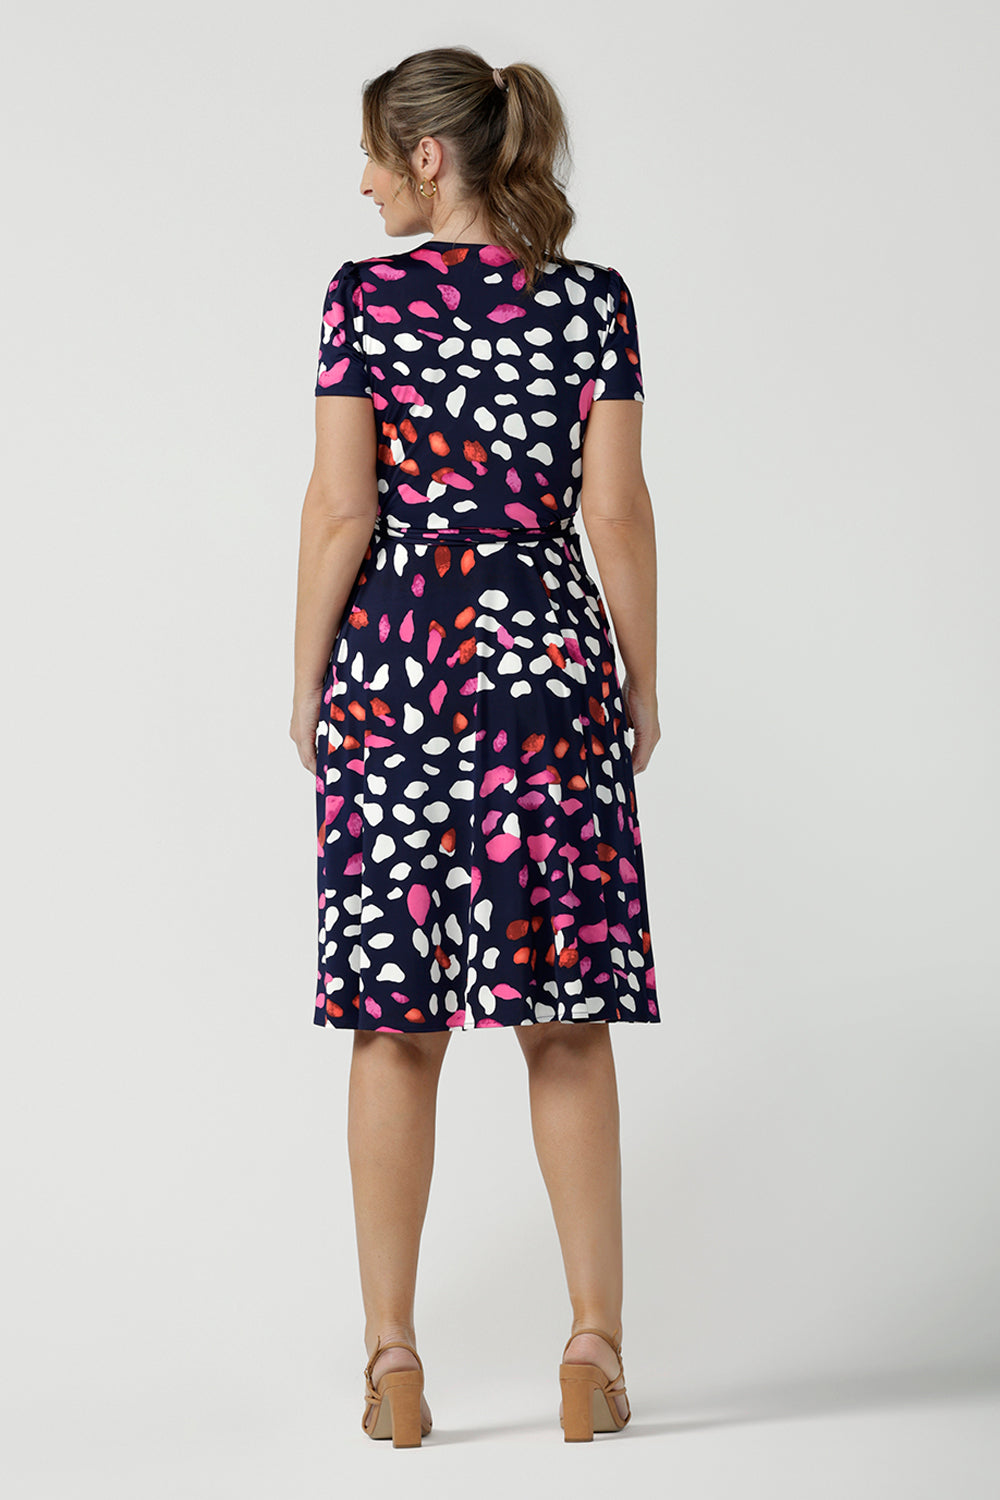 Back view of an over 40, size 10 woman wearing a abstract jersey print, knee length wrap dress with short sleeves. A great dress for summer casual wear, or for travel. Shop made in Australia dresses in petite to plus sizes online at Australian fashion brand, Leina & Fleur.